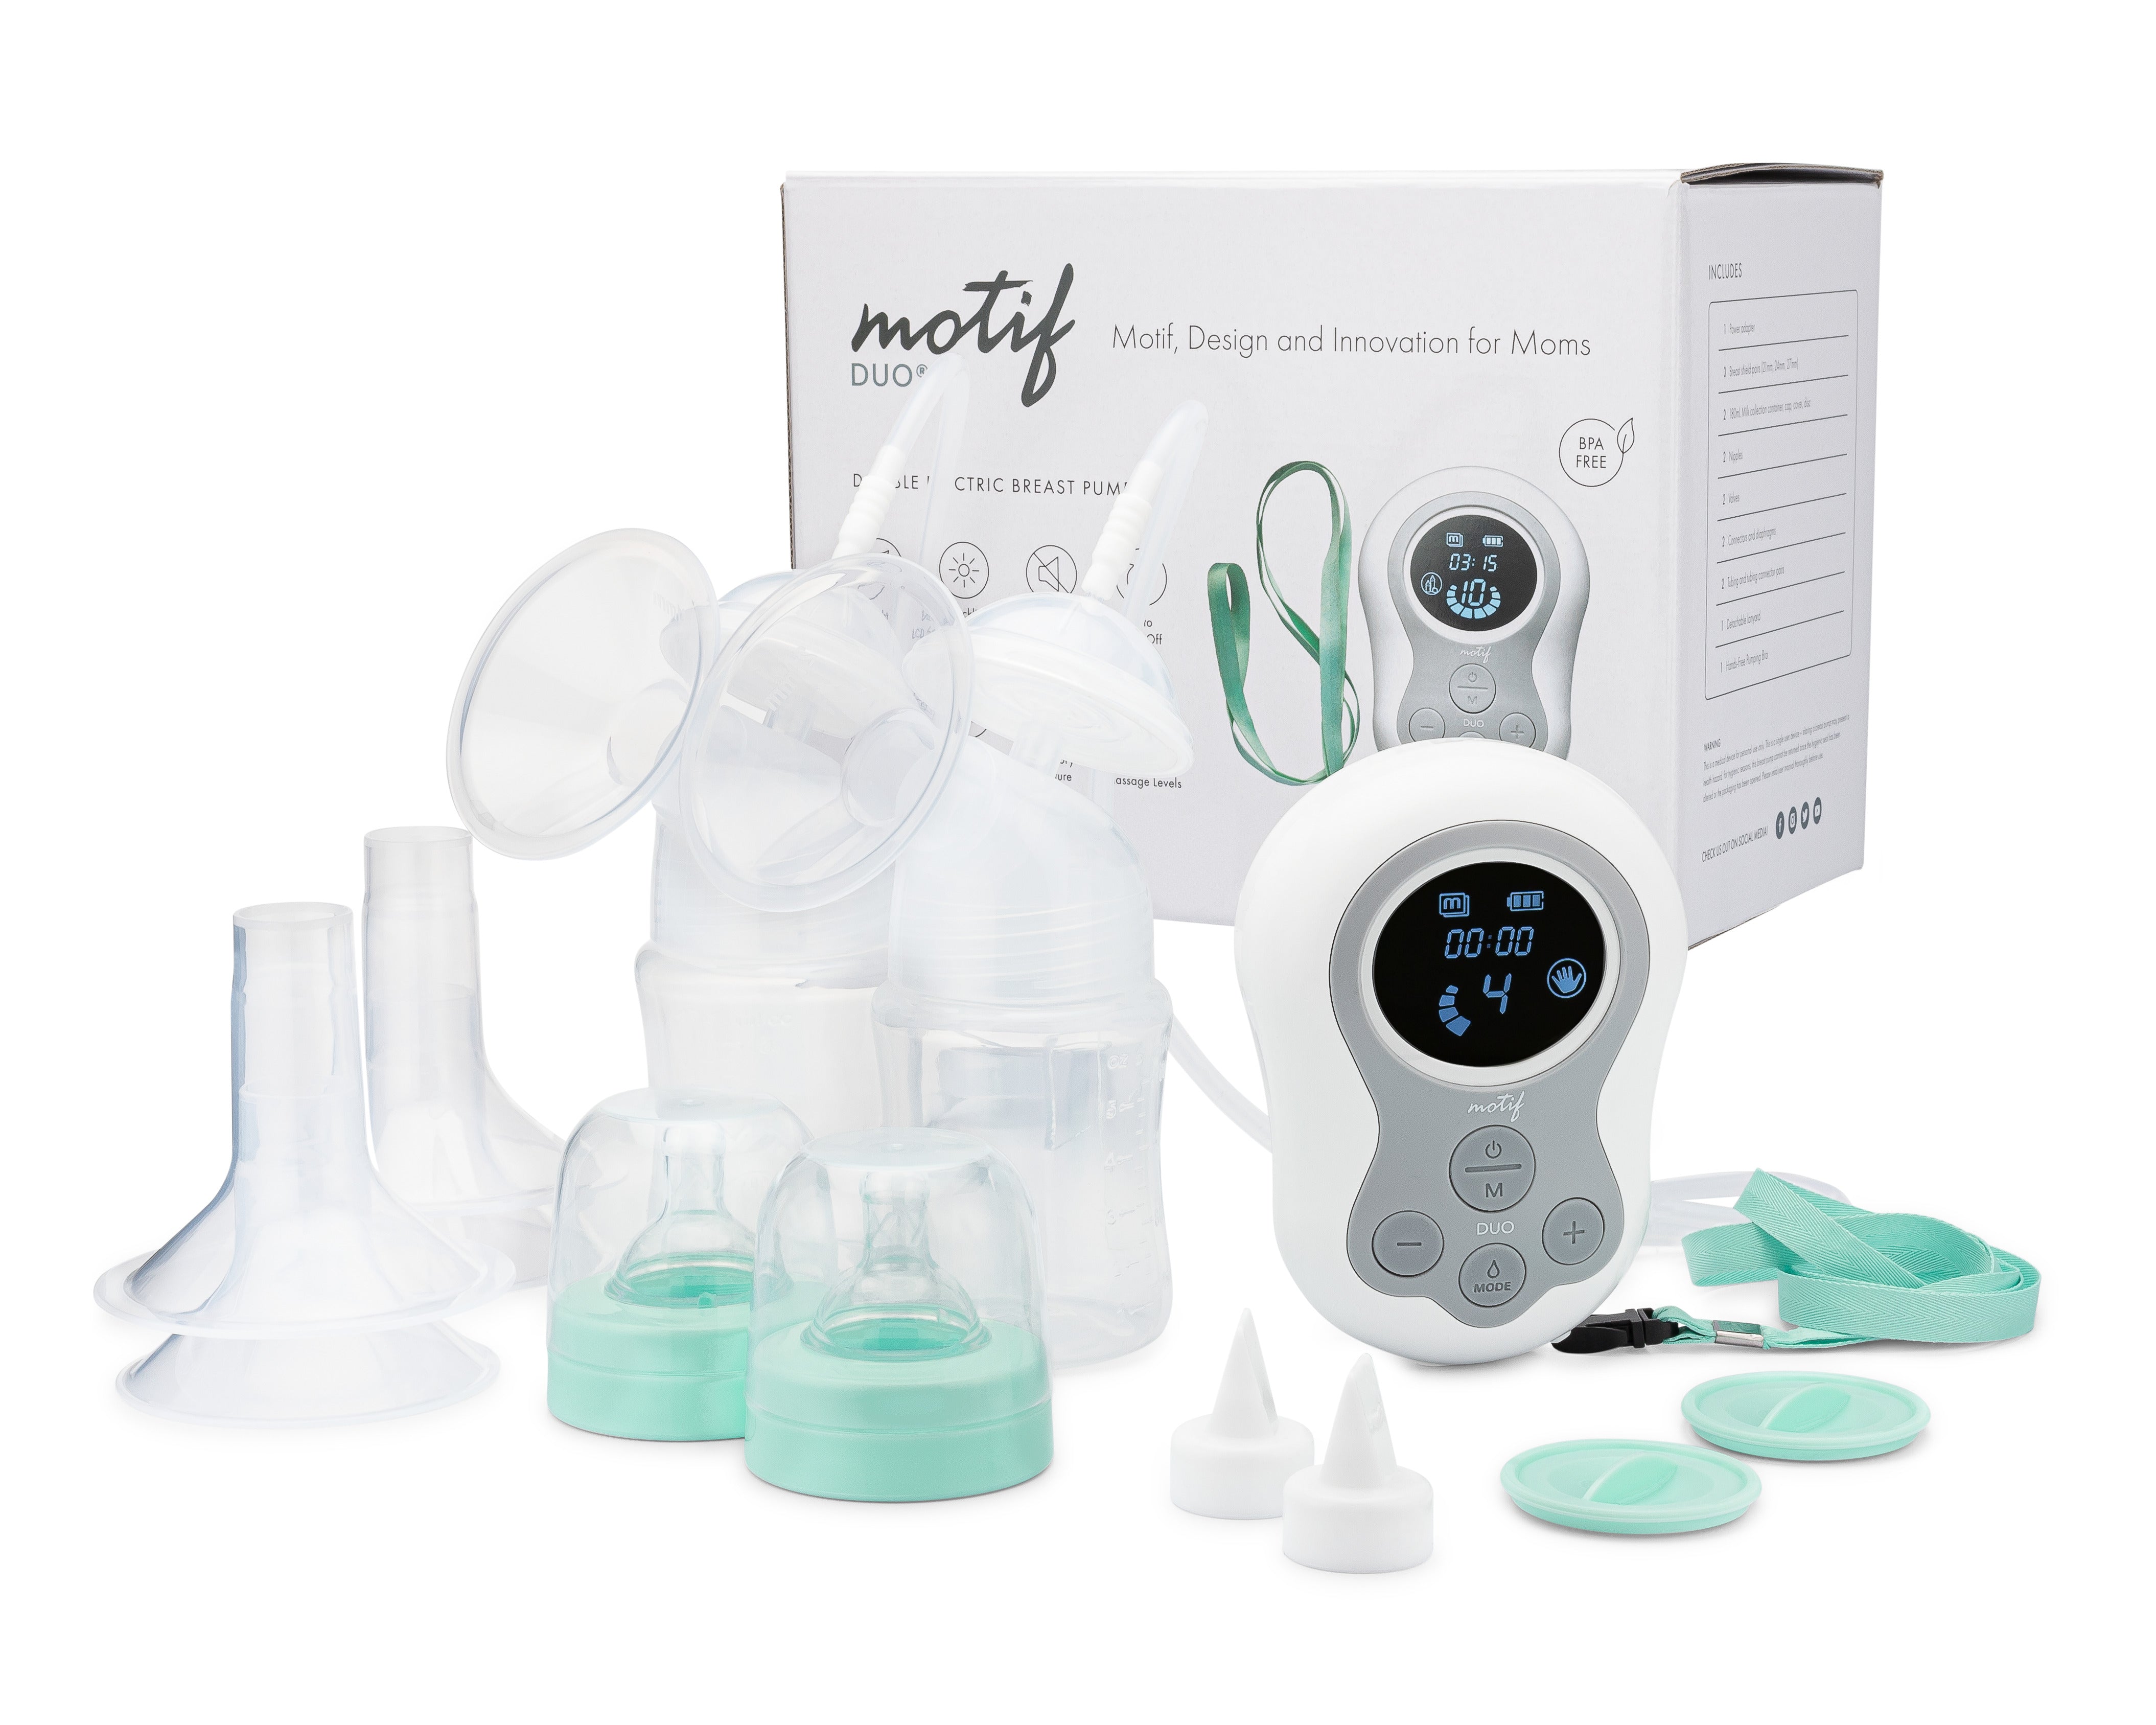 Motif Duo Double Electric Breast Pump all contents of the box placed in front of the box